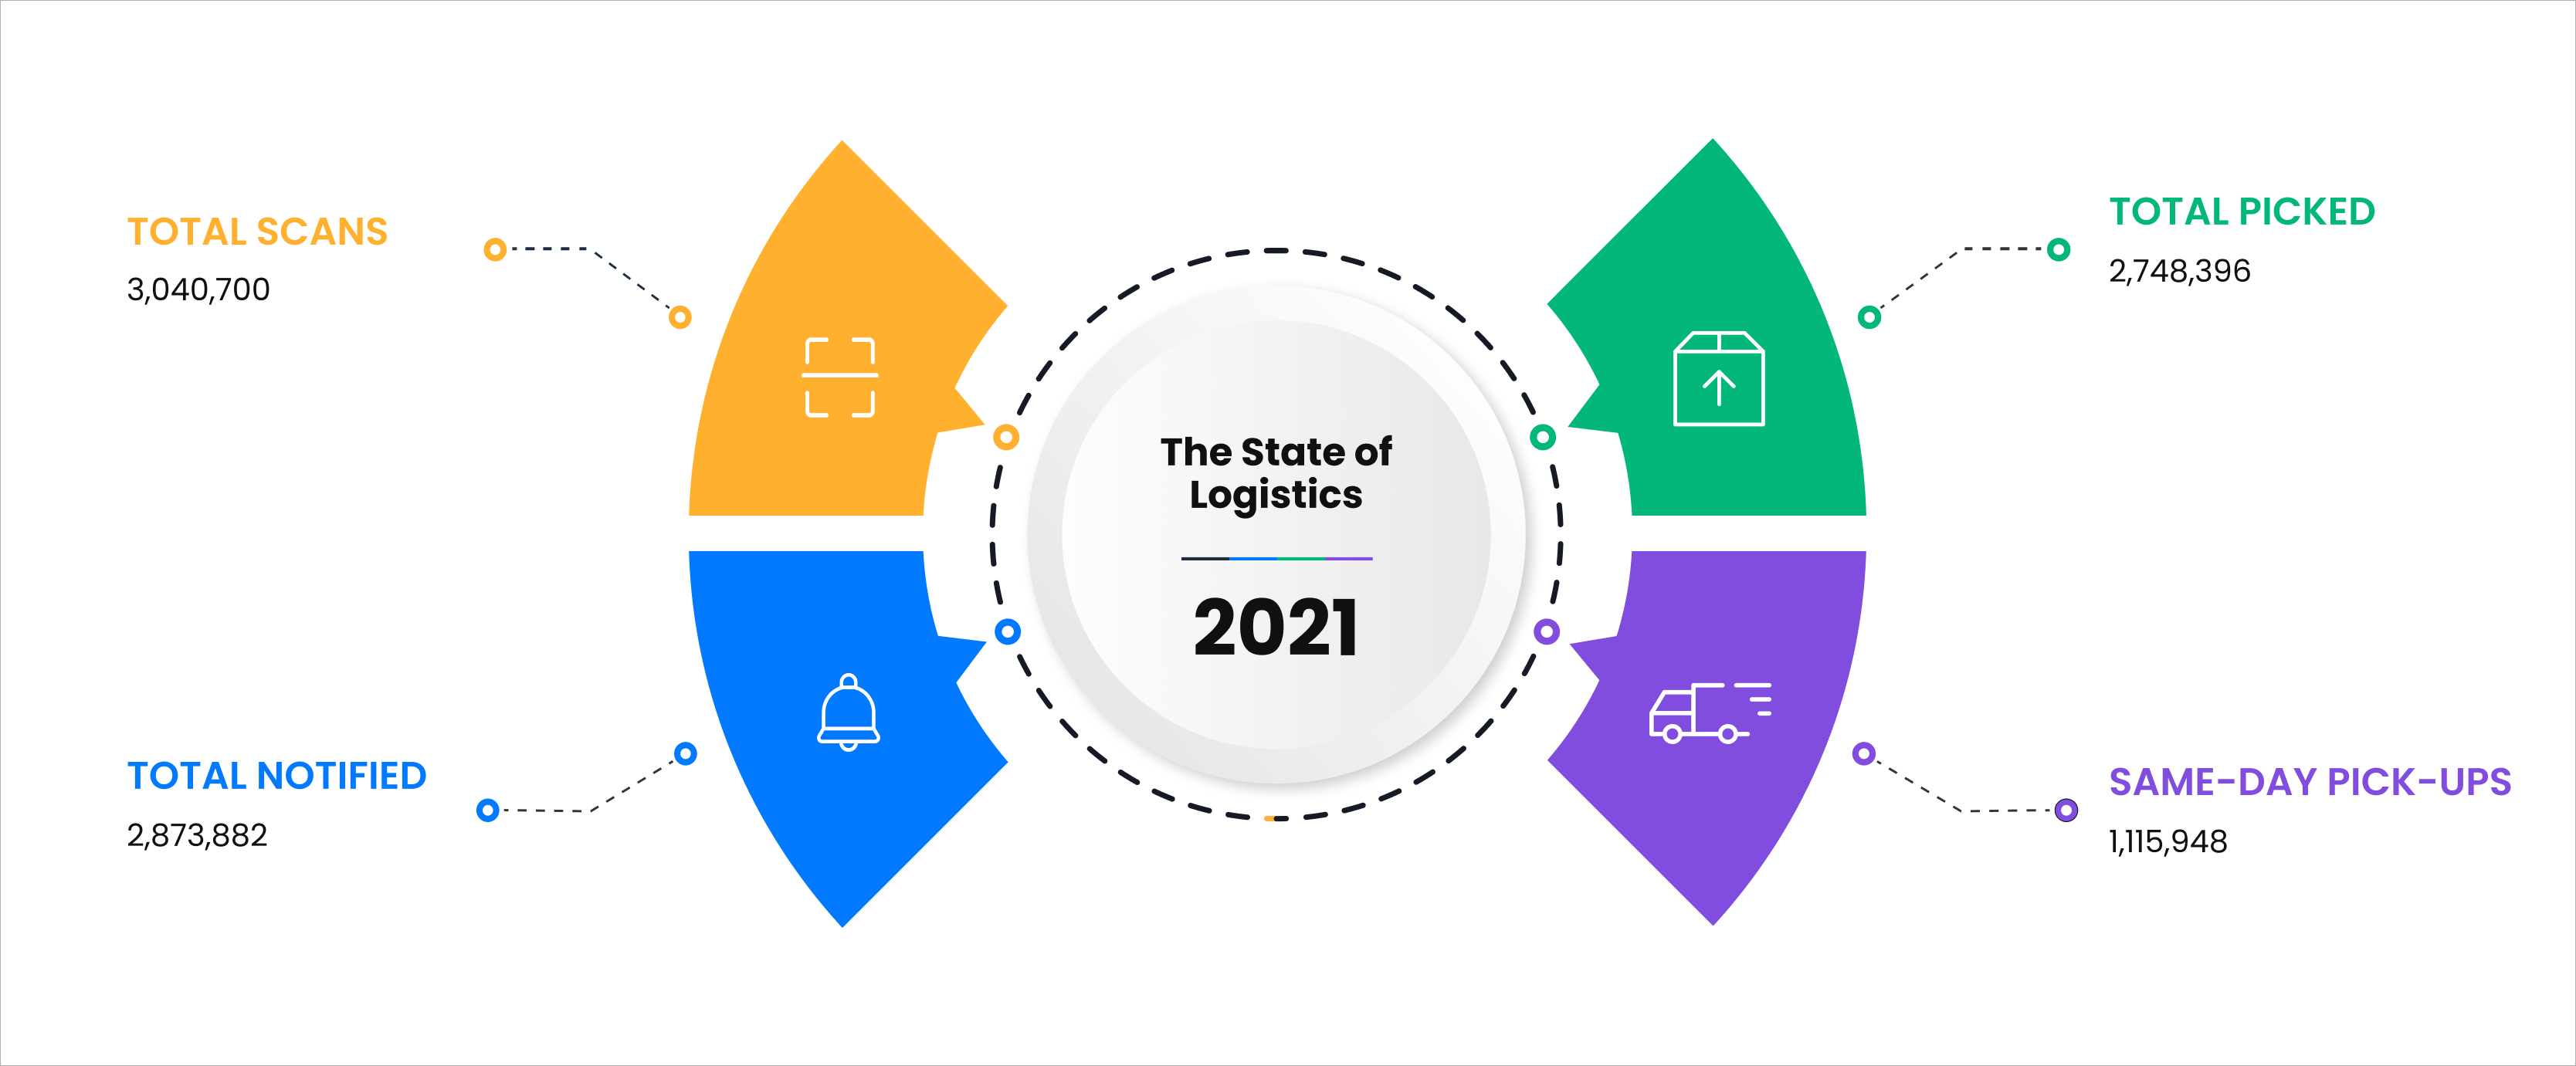 The State of Logistics in 2021 – A Detailed Overview 